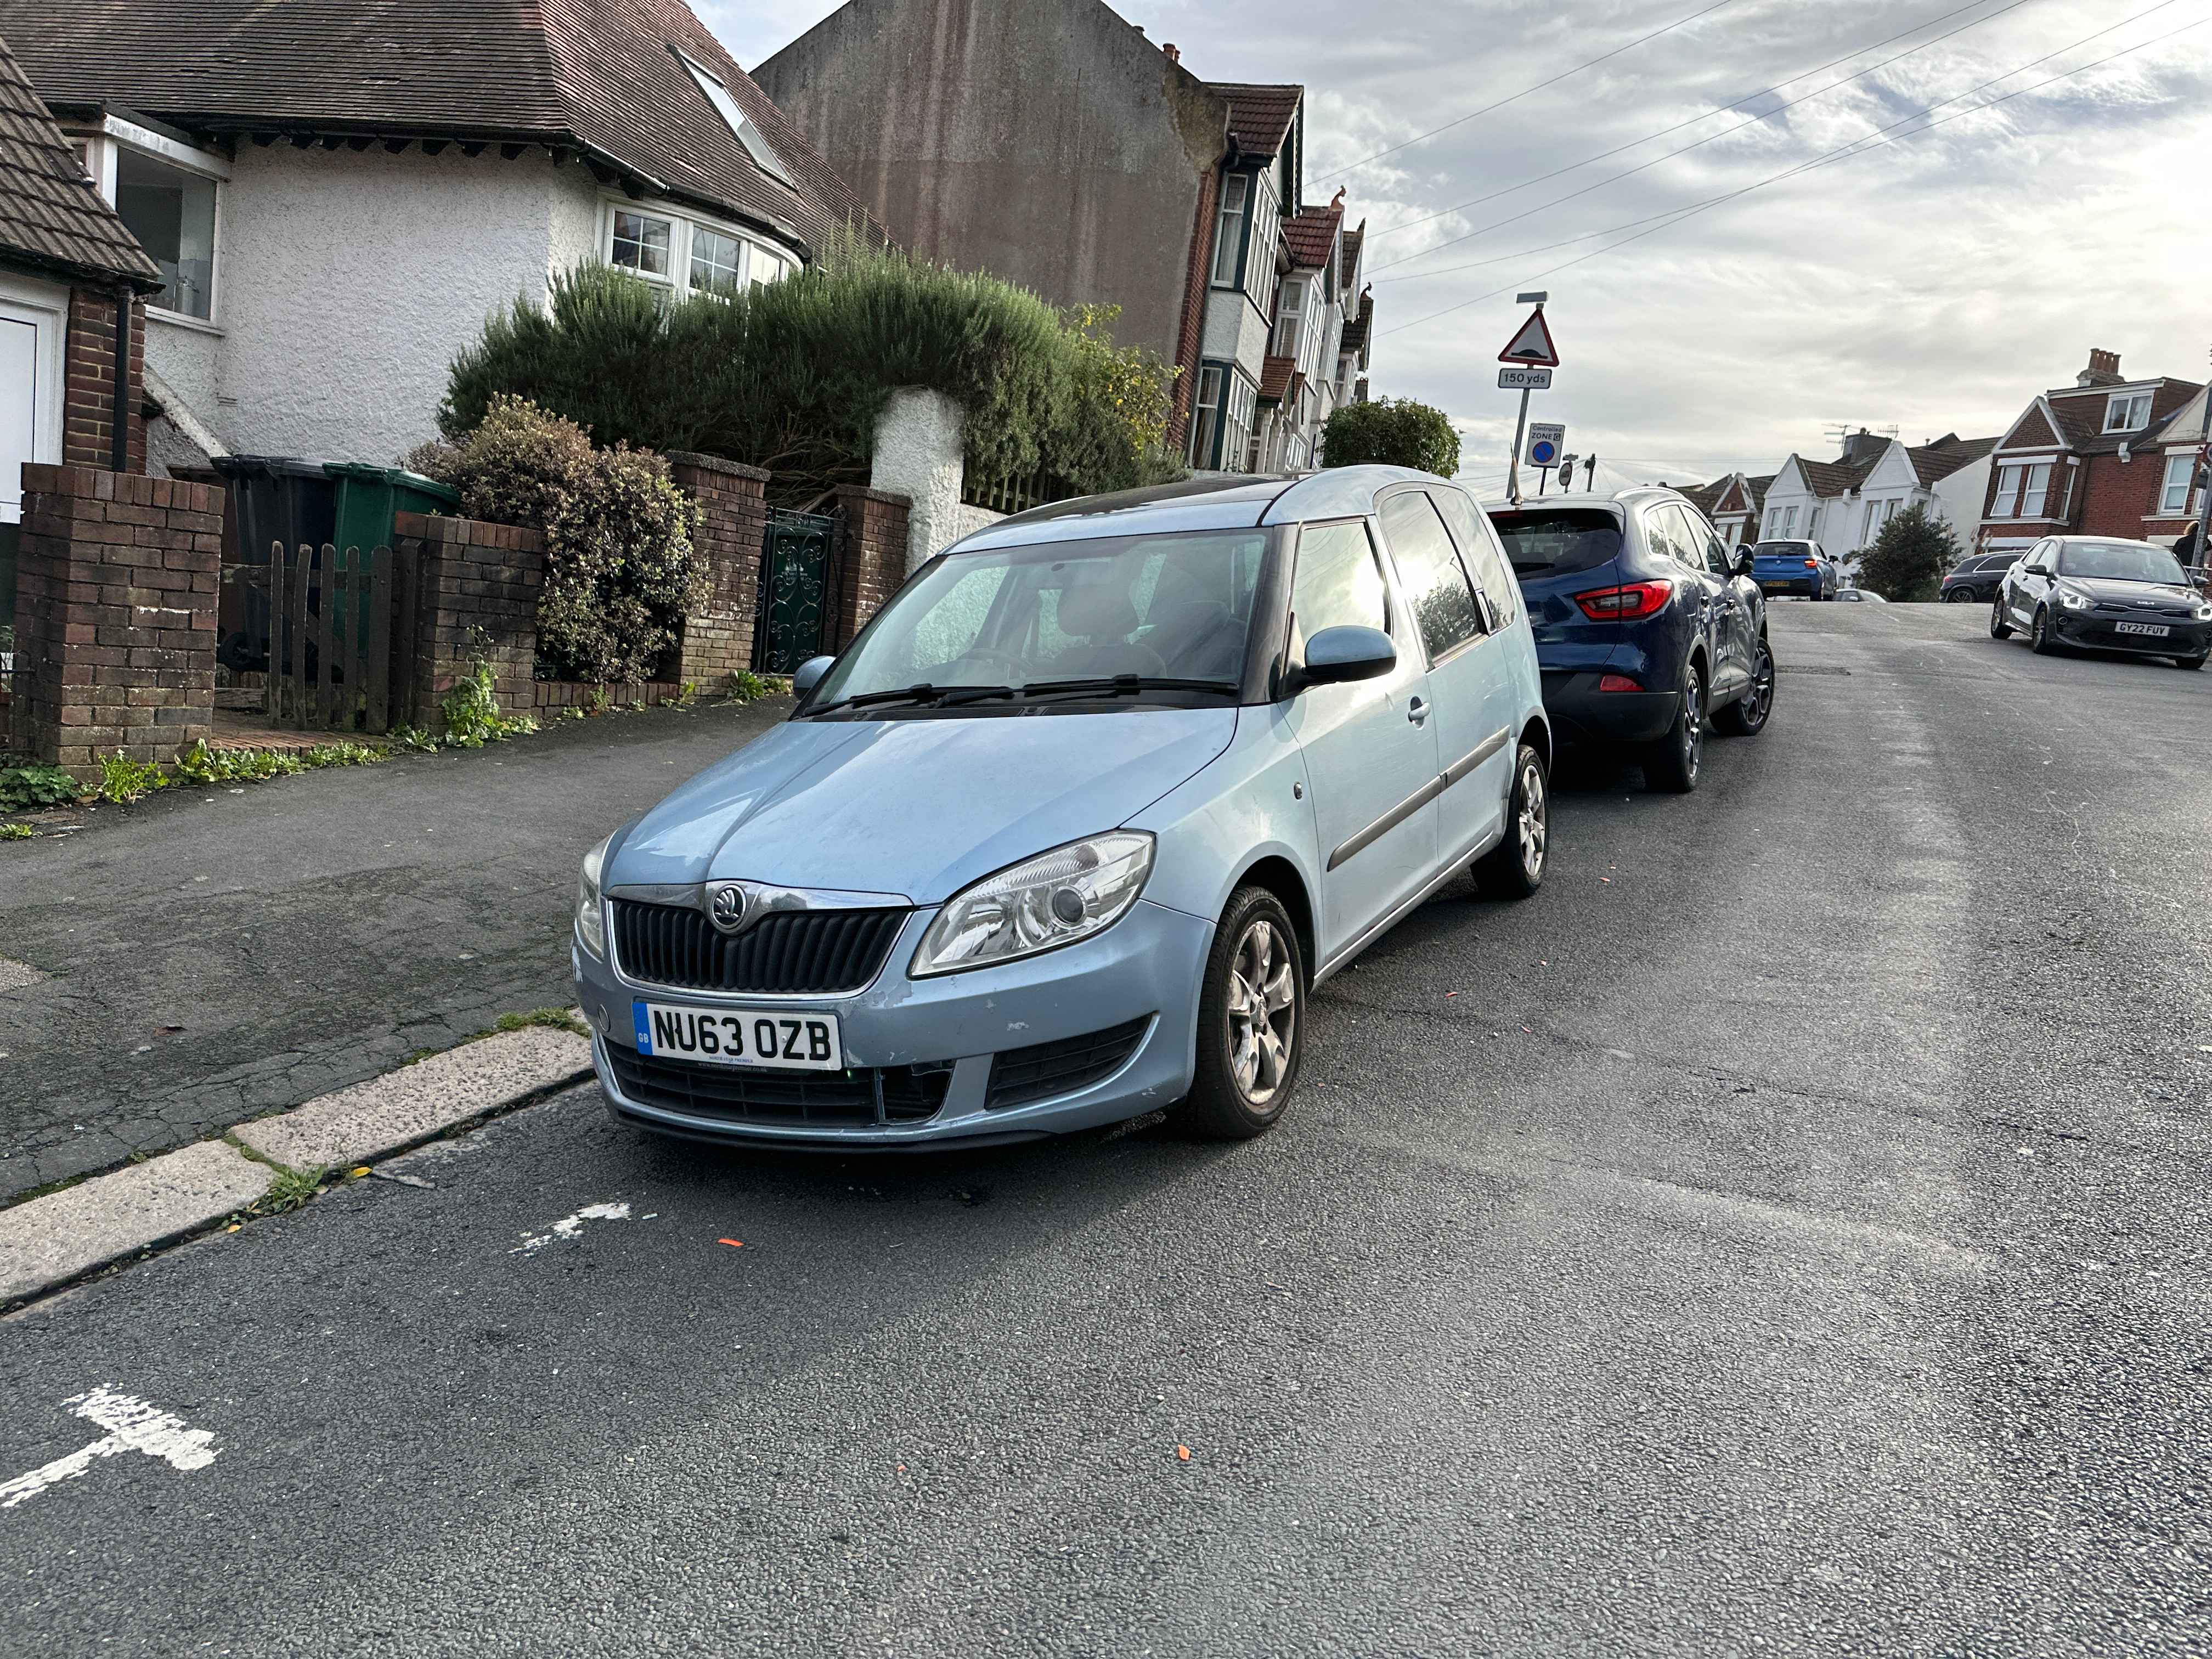 Photograph of NU63 OZB - a Blue Skoda Roomster parked in Hollingdean by a non-resident. The seventh of nineteen photographs supplied by the residents of Hollingdean.